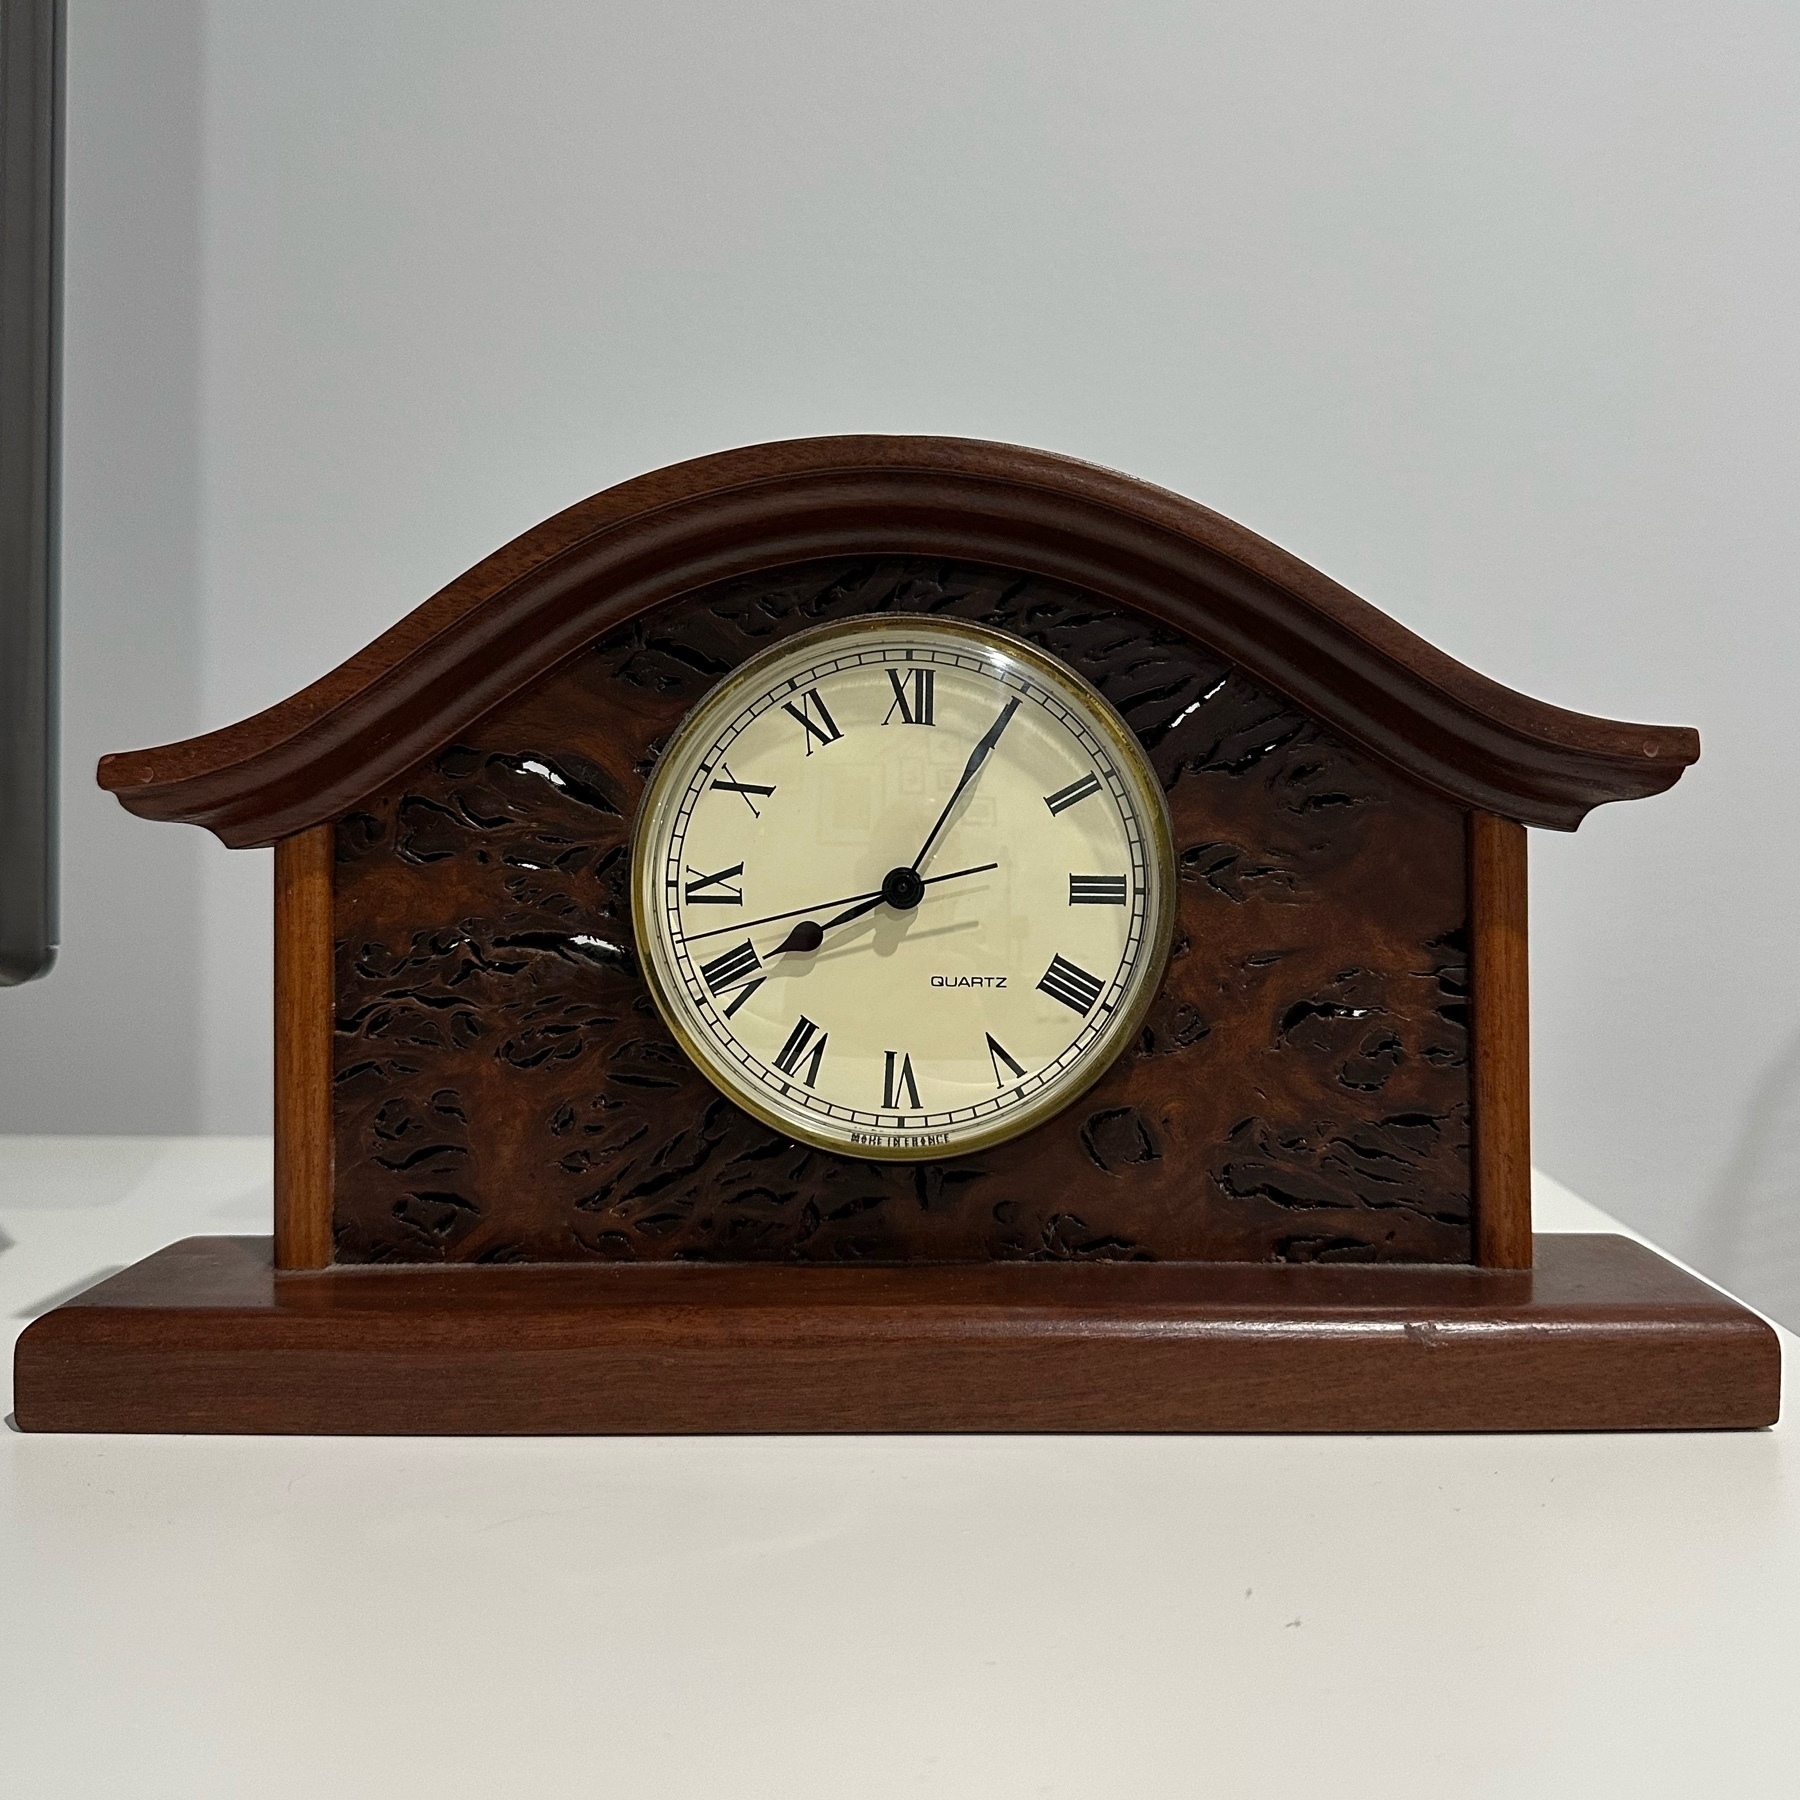 A round clock face showing 8:05 set into carved wood. The shape is a classic mantel clock with flat base and curved top.